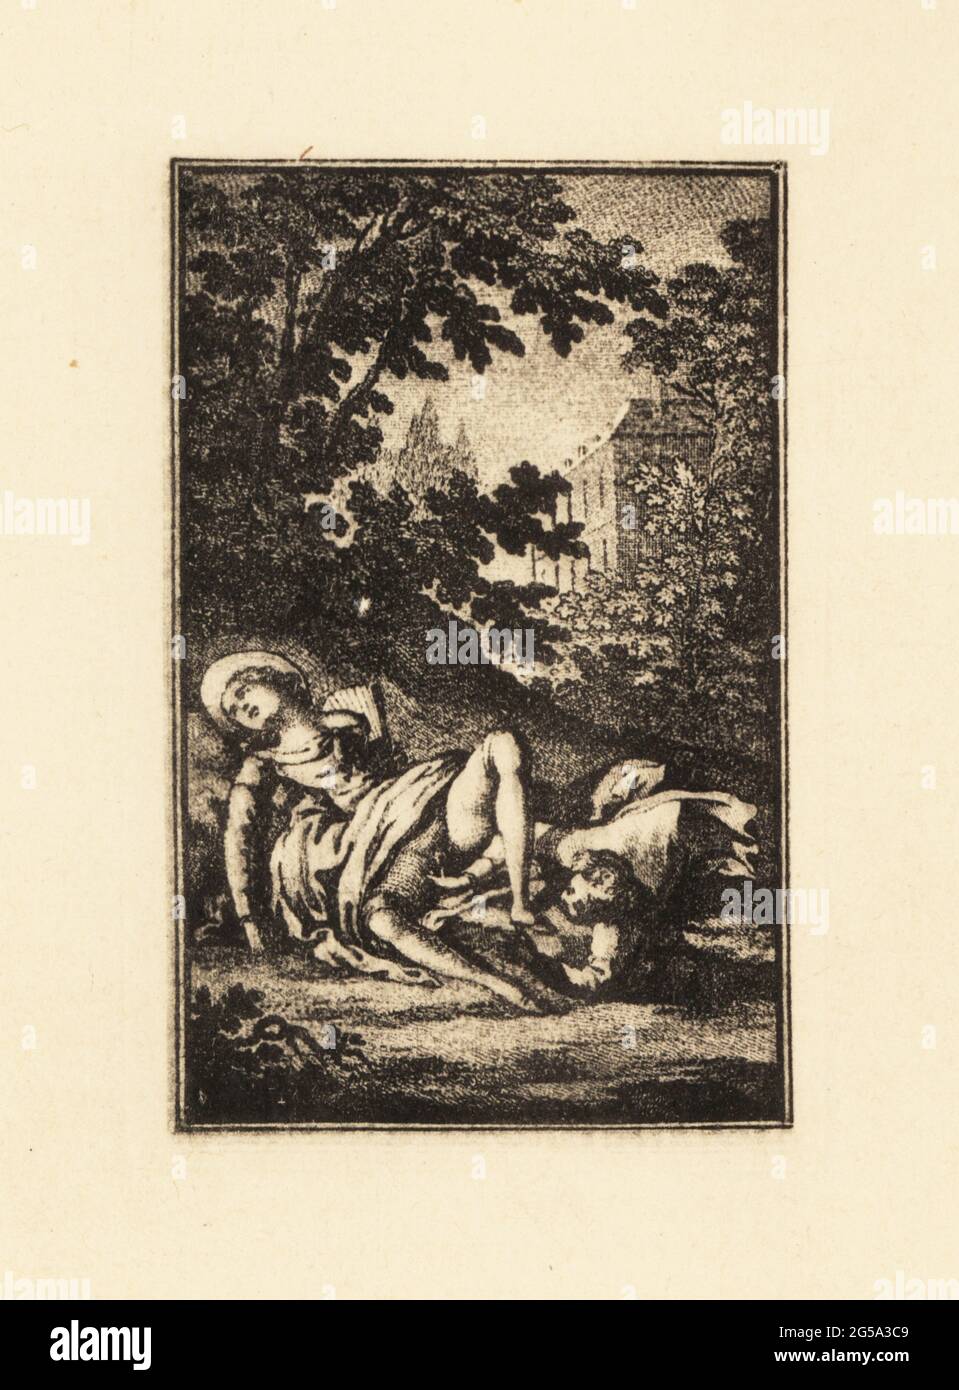 A gentleman masturbating a clothed woman under her petticoats in the garden of a chateau, 18th century. Copperplate engraving heliogravure by Francois Rolland Elluin after Antoine Borel from Jean-Charles Gervaise de Latouche’s Memoiren des Saturnin, von ihm selbst Niedergeschreiben, Privatdruck, Liepzig, 1911. Also known as Le Portier des Chartreux, it was one of several erotic novels written by Latouche, 1715-1782, a lawyer at the Paris Parliament. Stock Photo